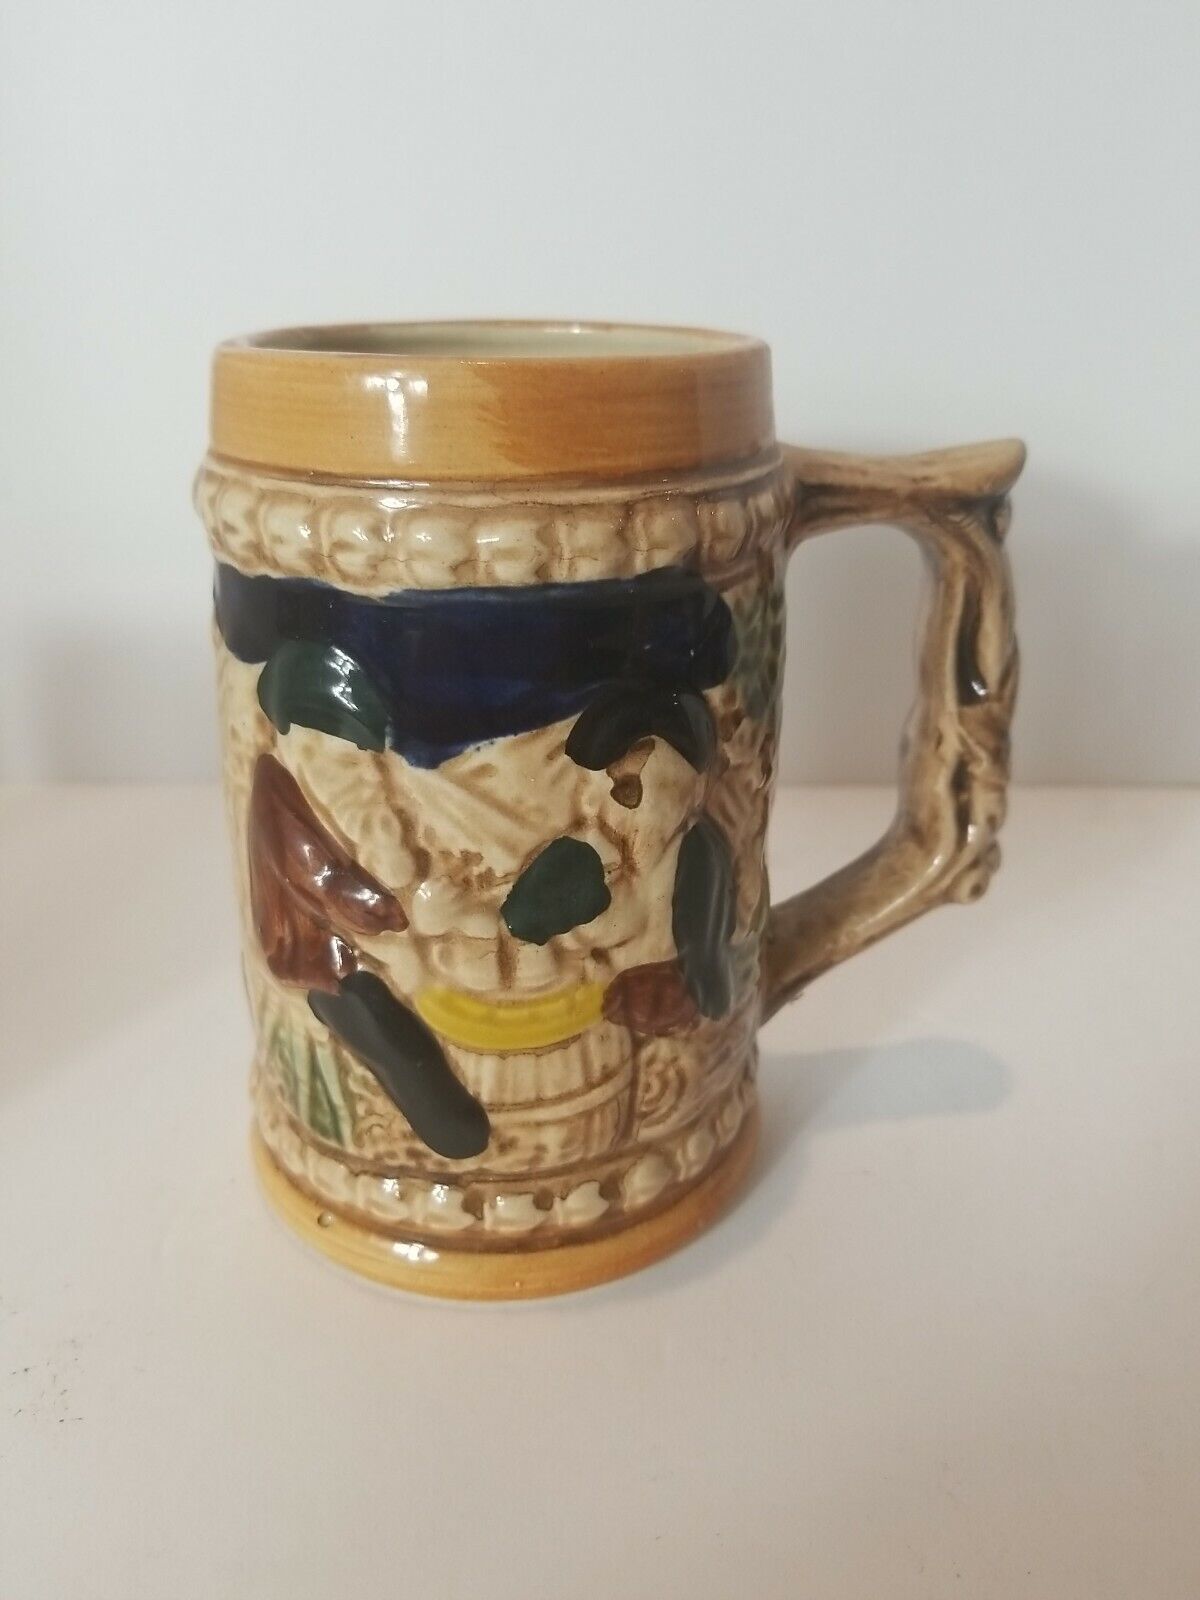 Vintage Sanyo Decorative Stein Beer Mug Cup Made in Japan Collectable